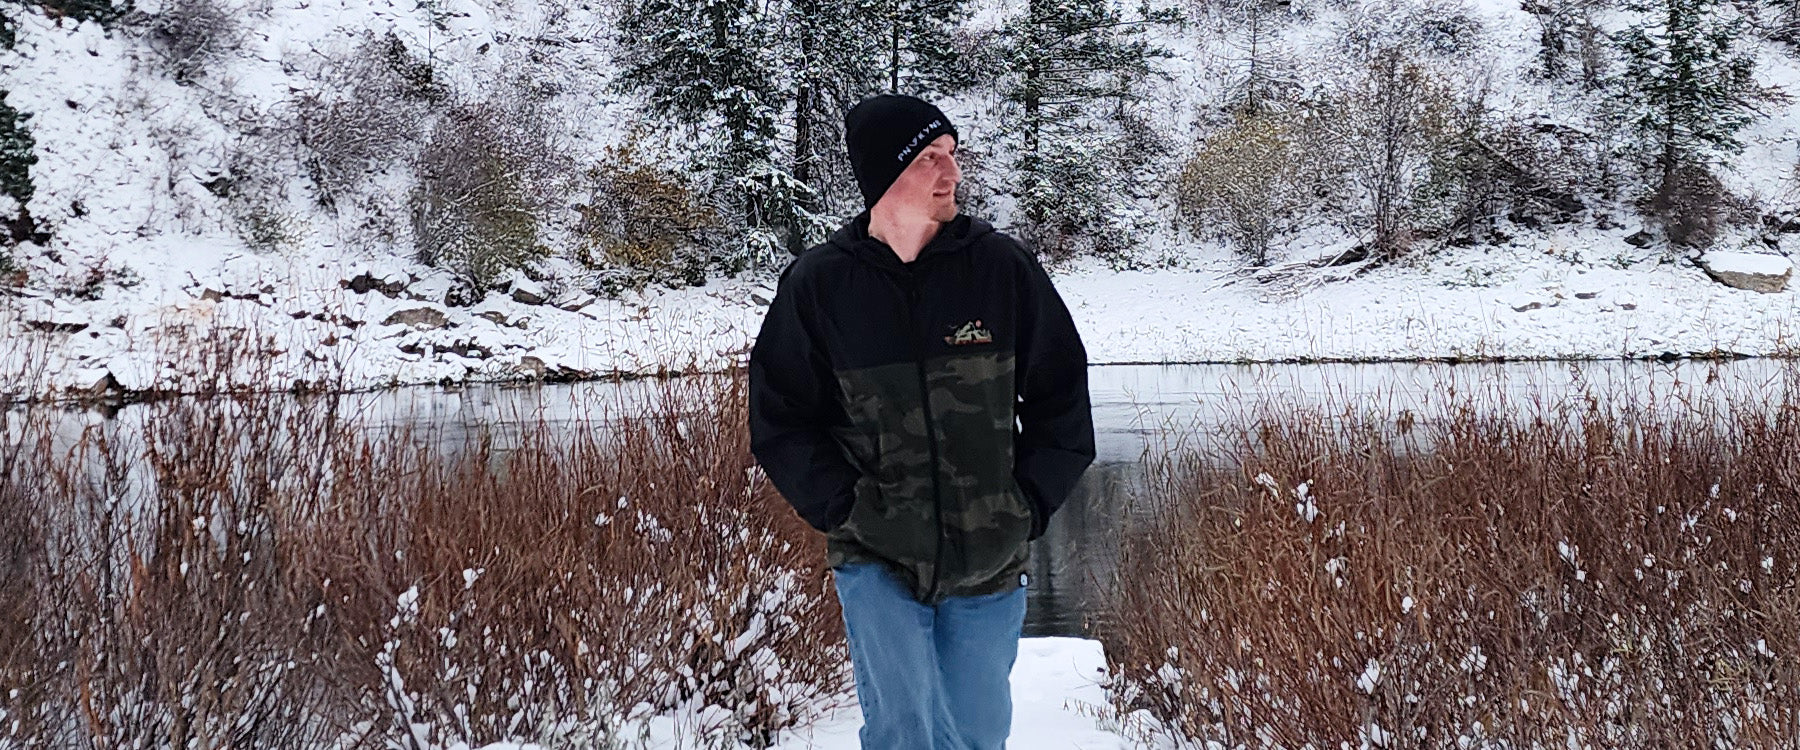 Joe from PNW KYNE at a snowy river bank in winter